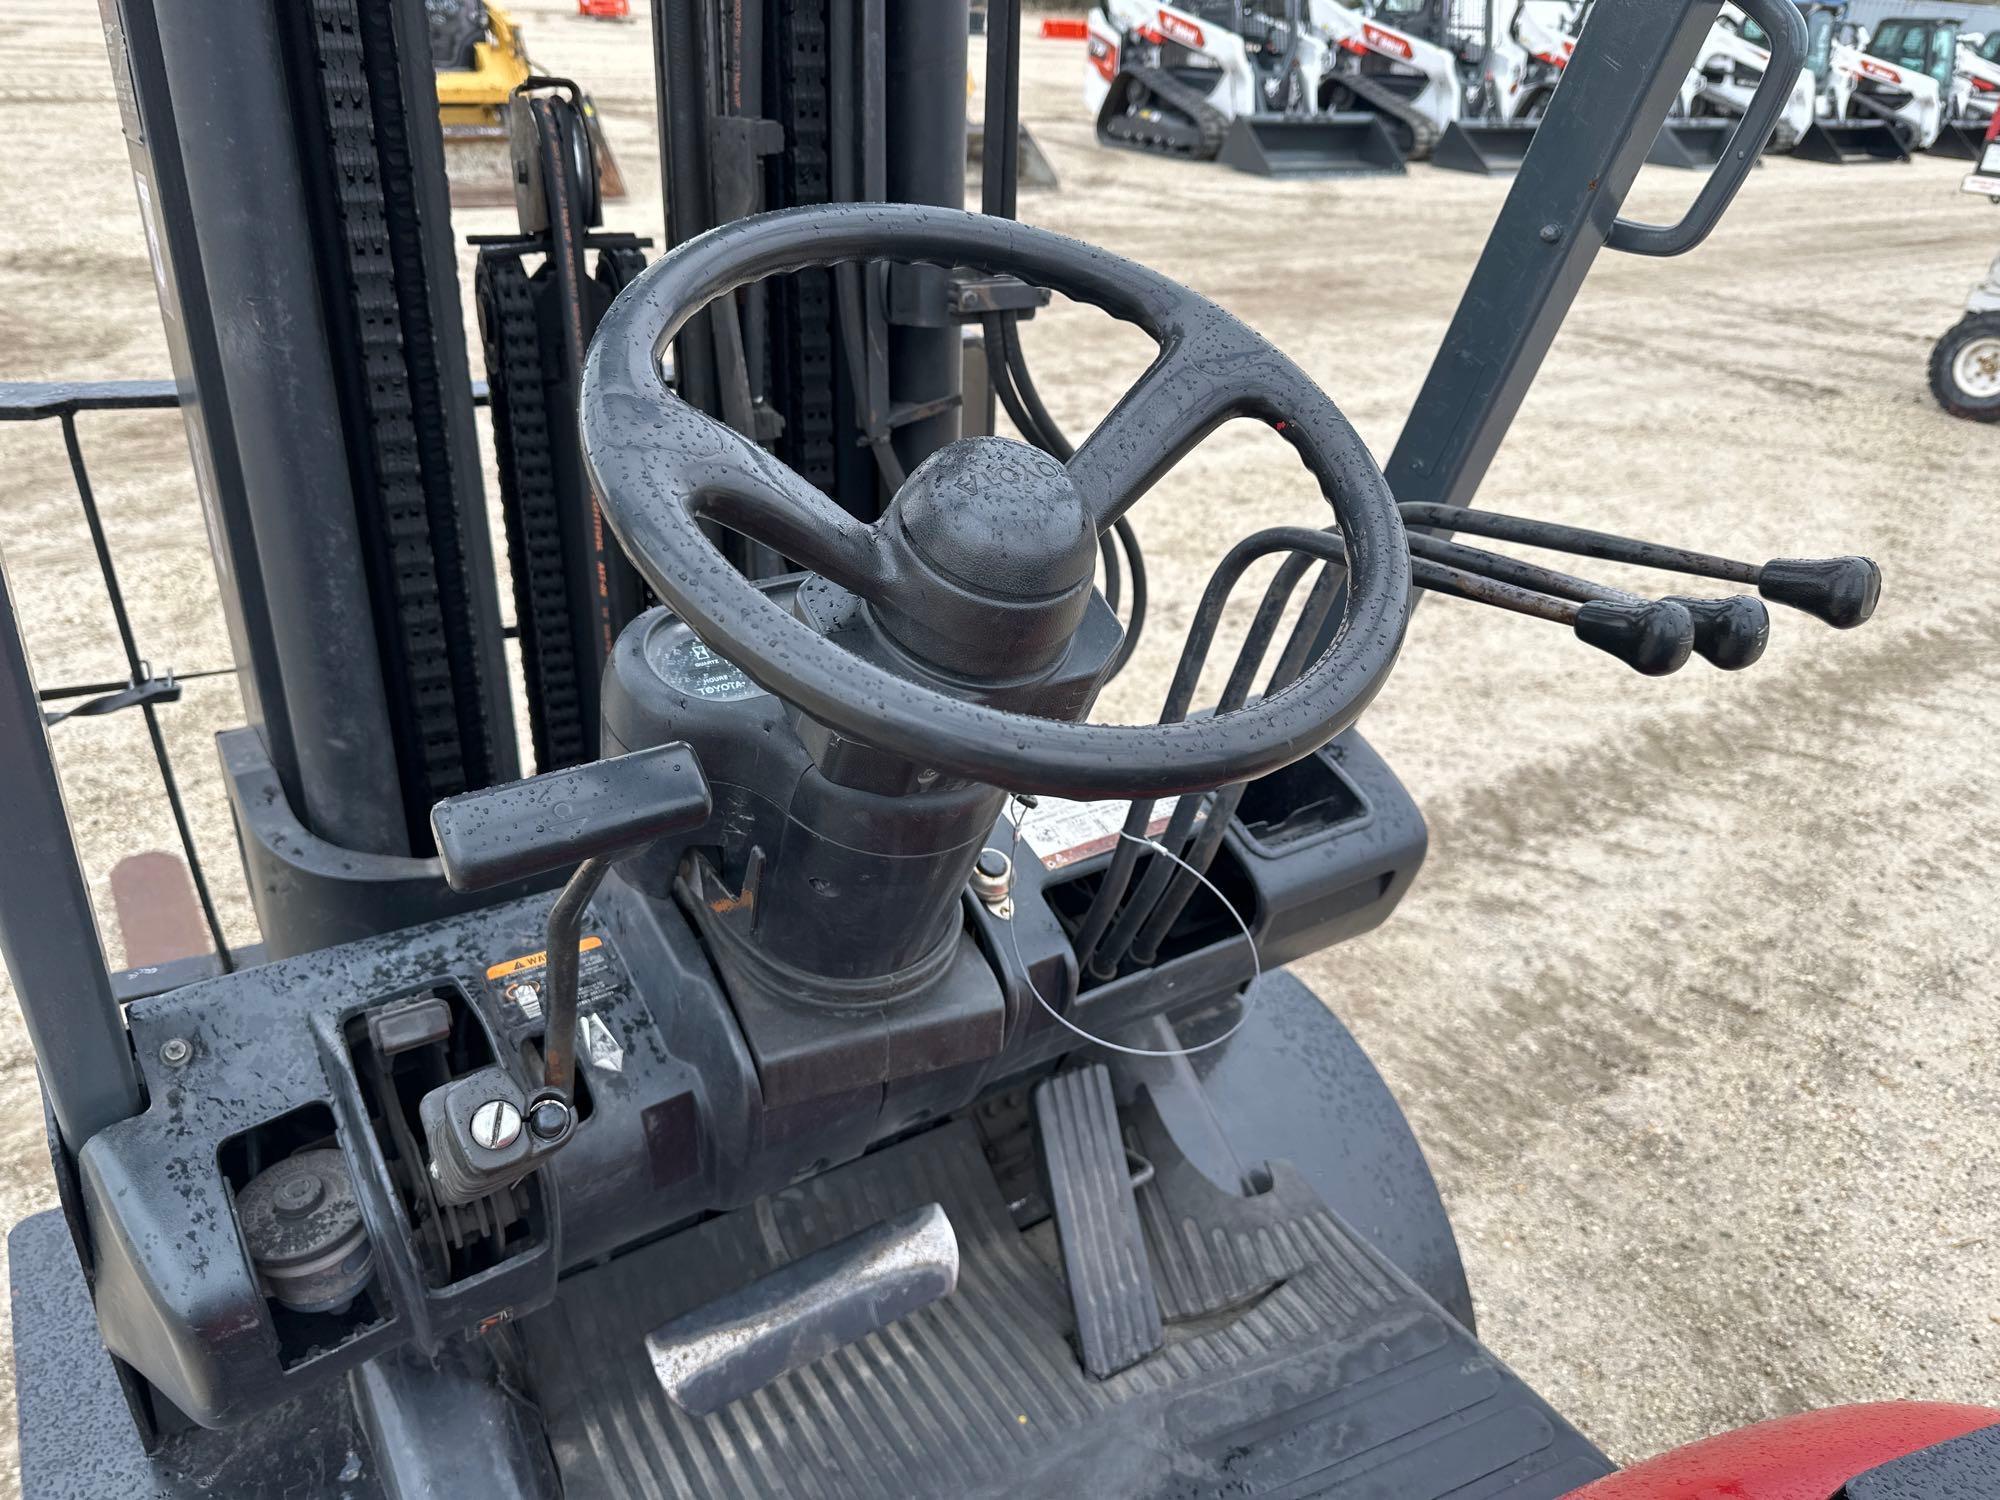 TOYOTA 6FGCU25 FORKLIFT SN:68621 powered by LP engine, equipped with OROPS, 5,000lb lift capacity,